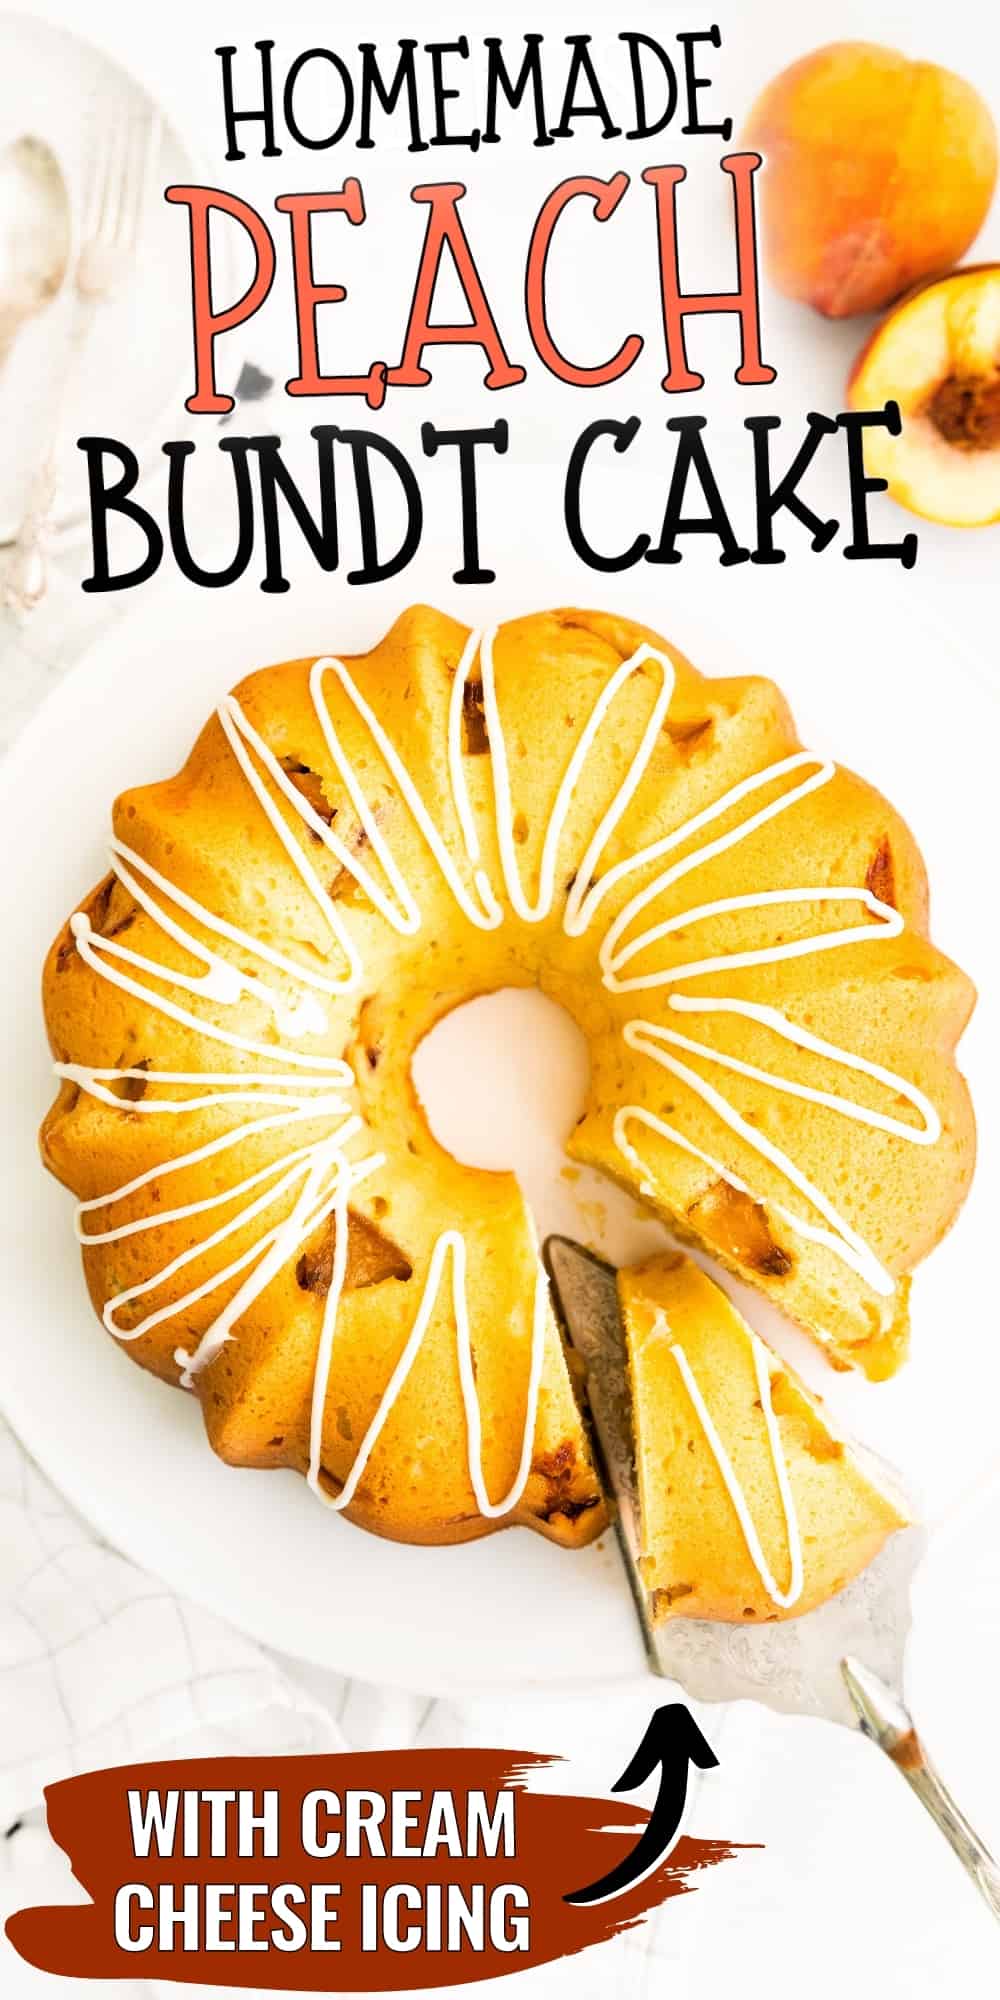 Pinterest Image, reads: Homemade Peach Bundt Cake with Cream Cheese Icing